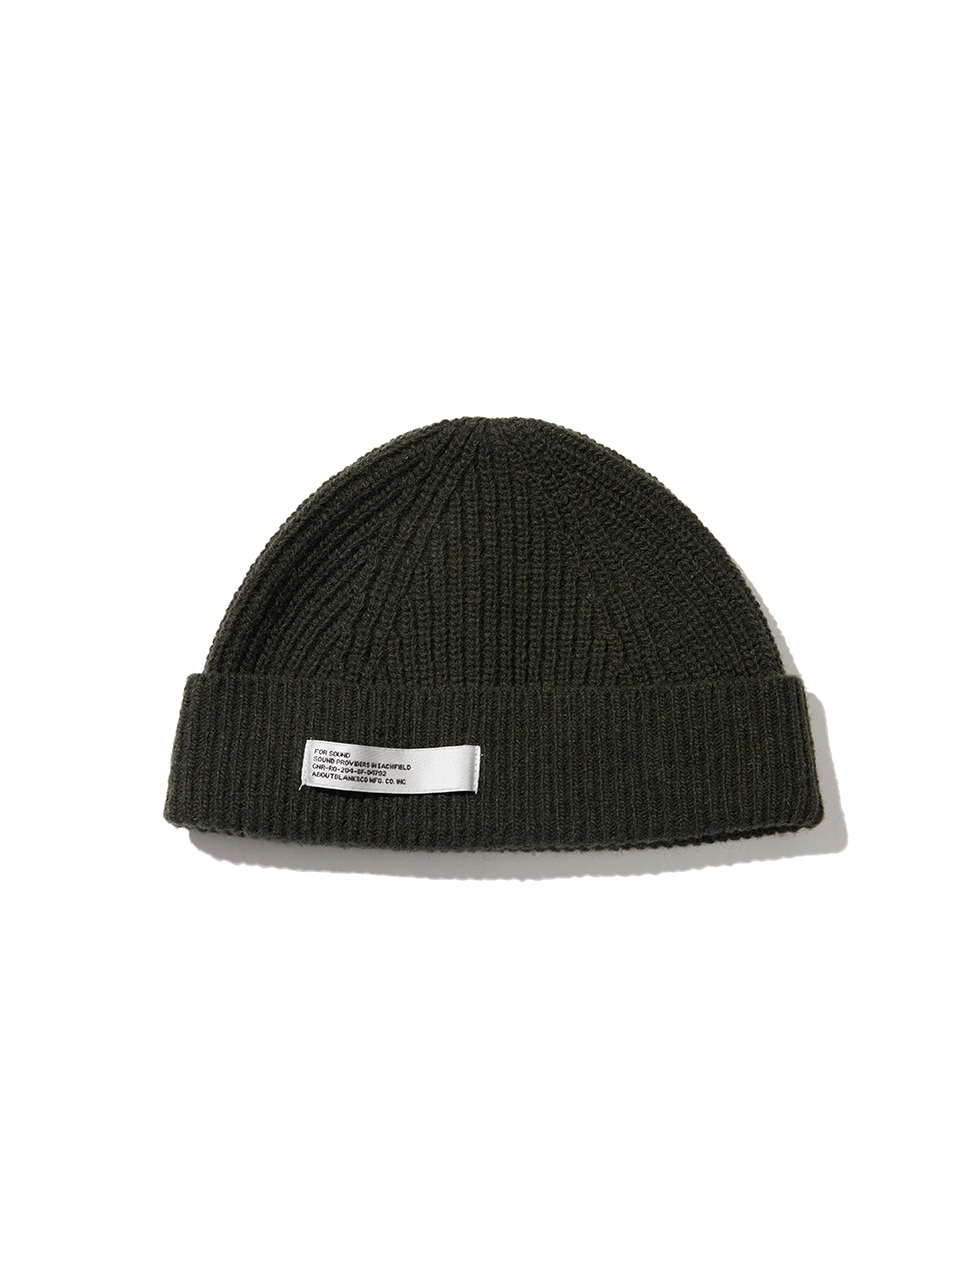 SOUNDSLIFE - Lambs Wool Watch Cap Olive